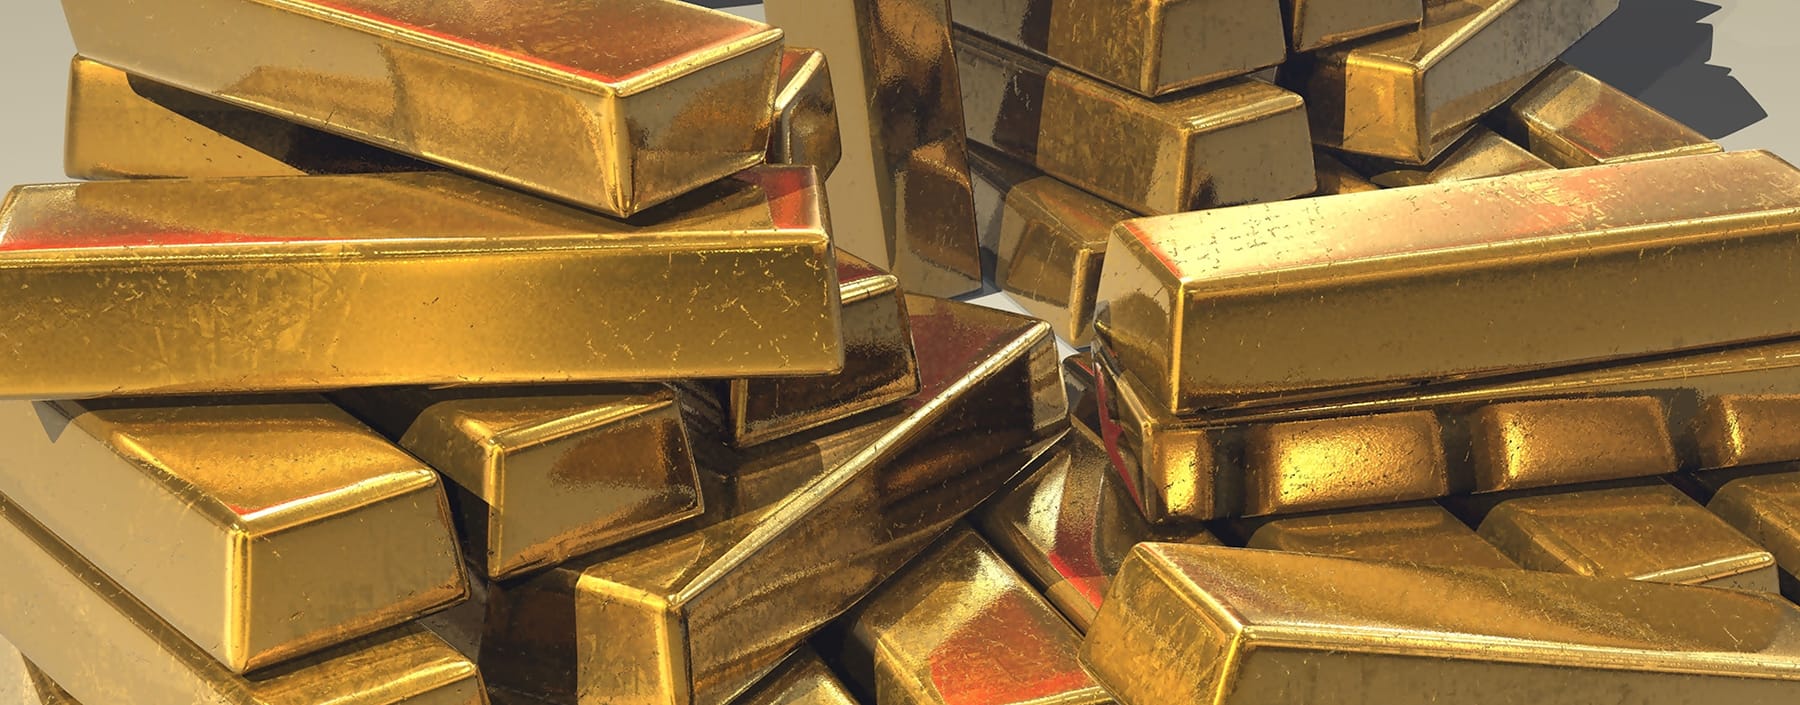 Public Adjusters Worth Their Weight In Gold